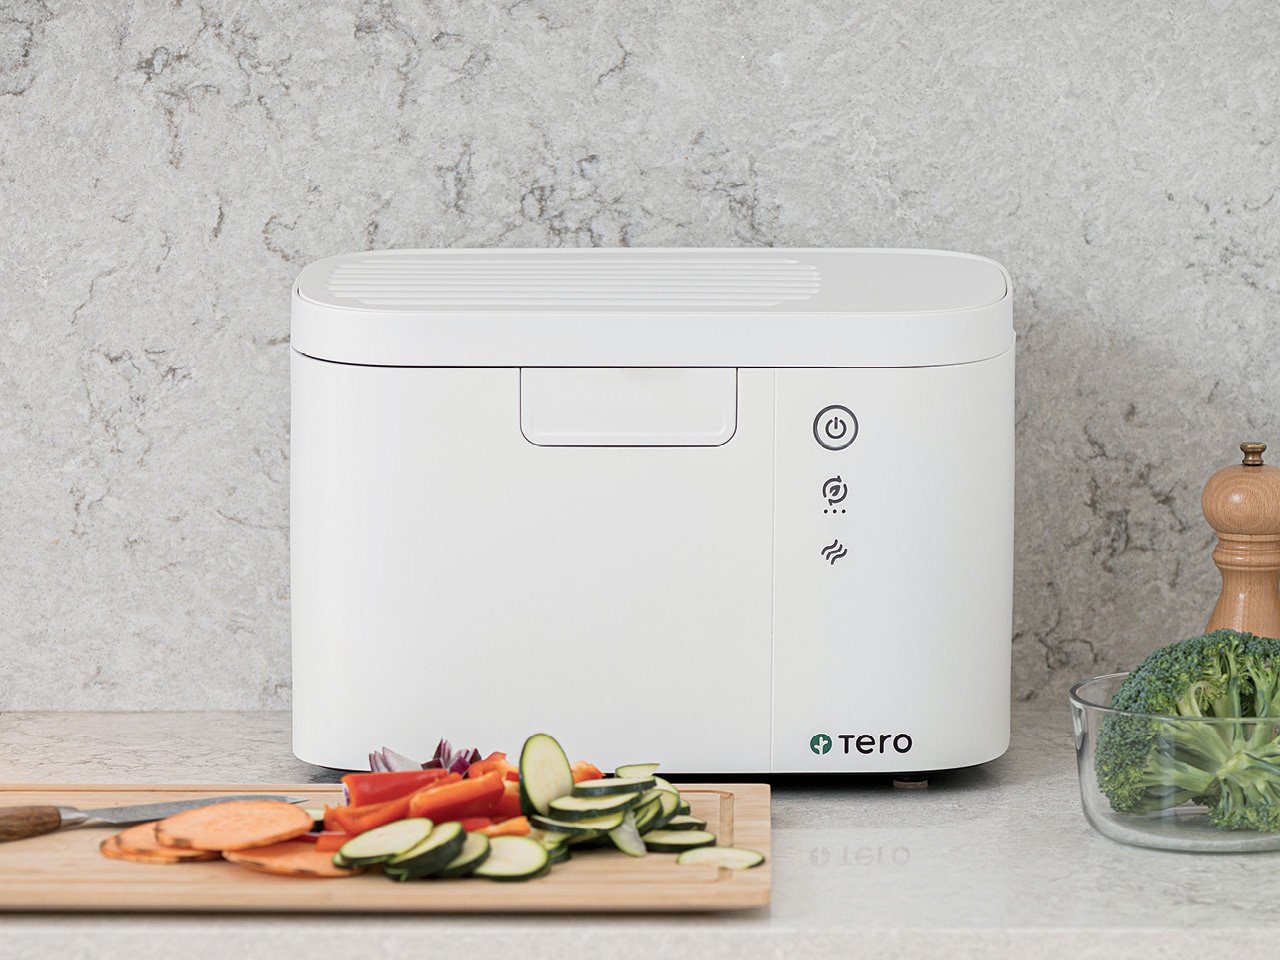 https://chatelaine.com/wp-content/uploads/2022/05/countertop-composter-tero.jpg